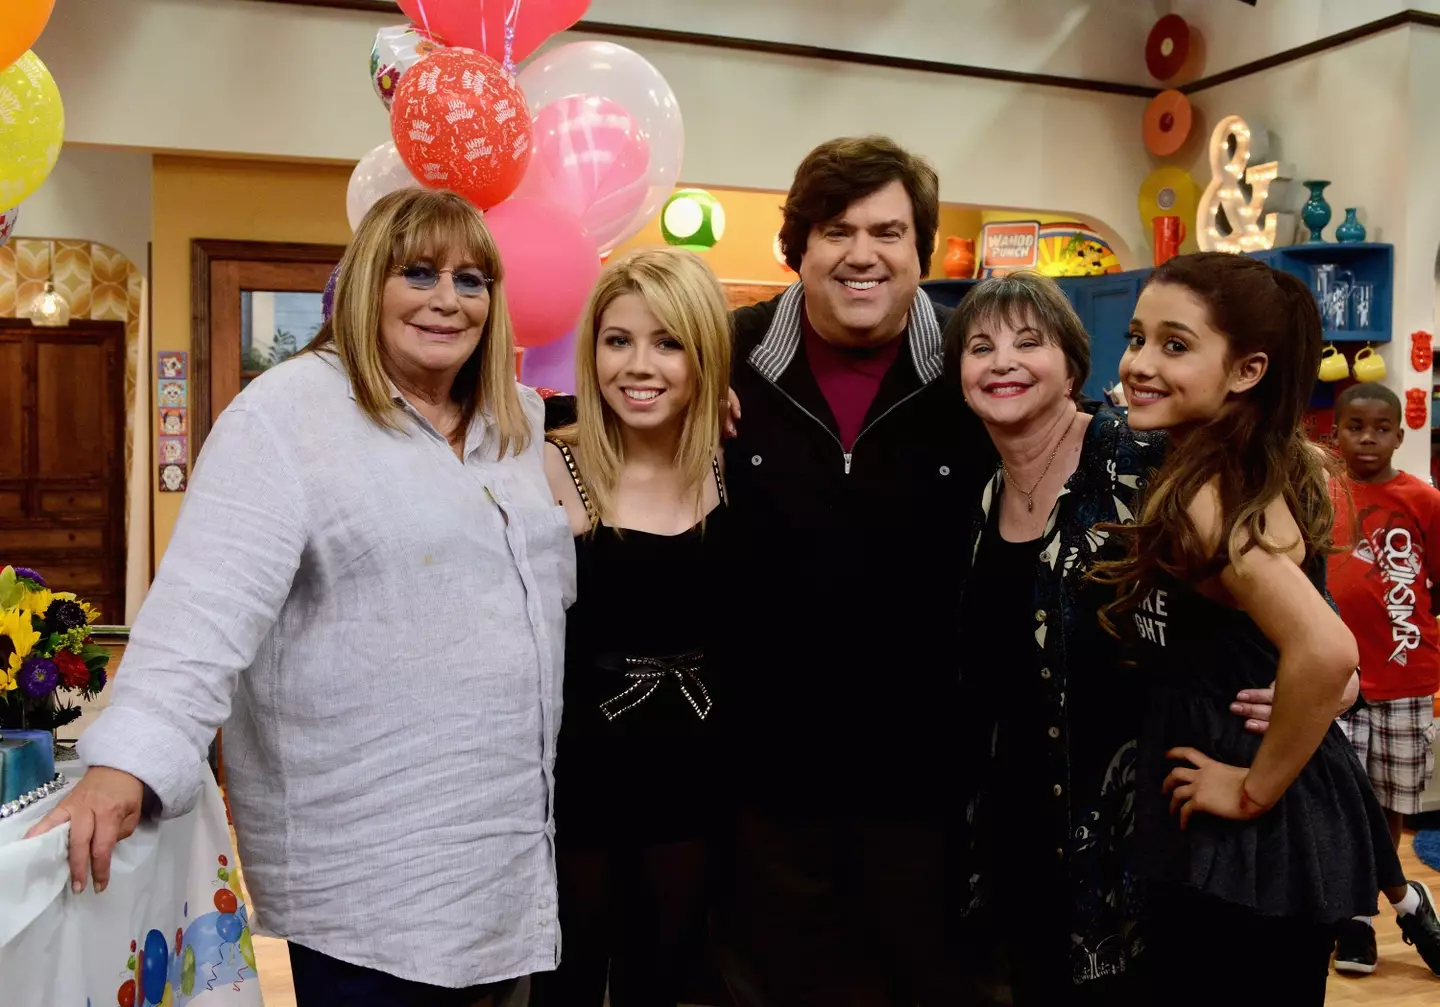 Dan Schneider worked on many of Nickelodeon's most iconic shows.